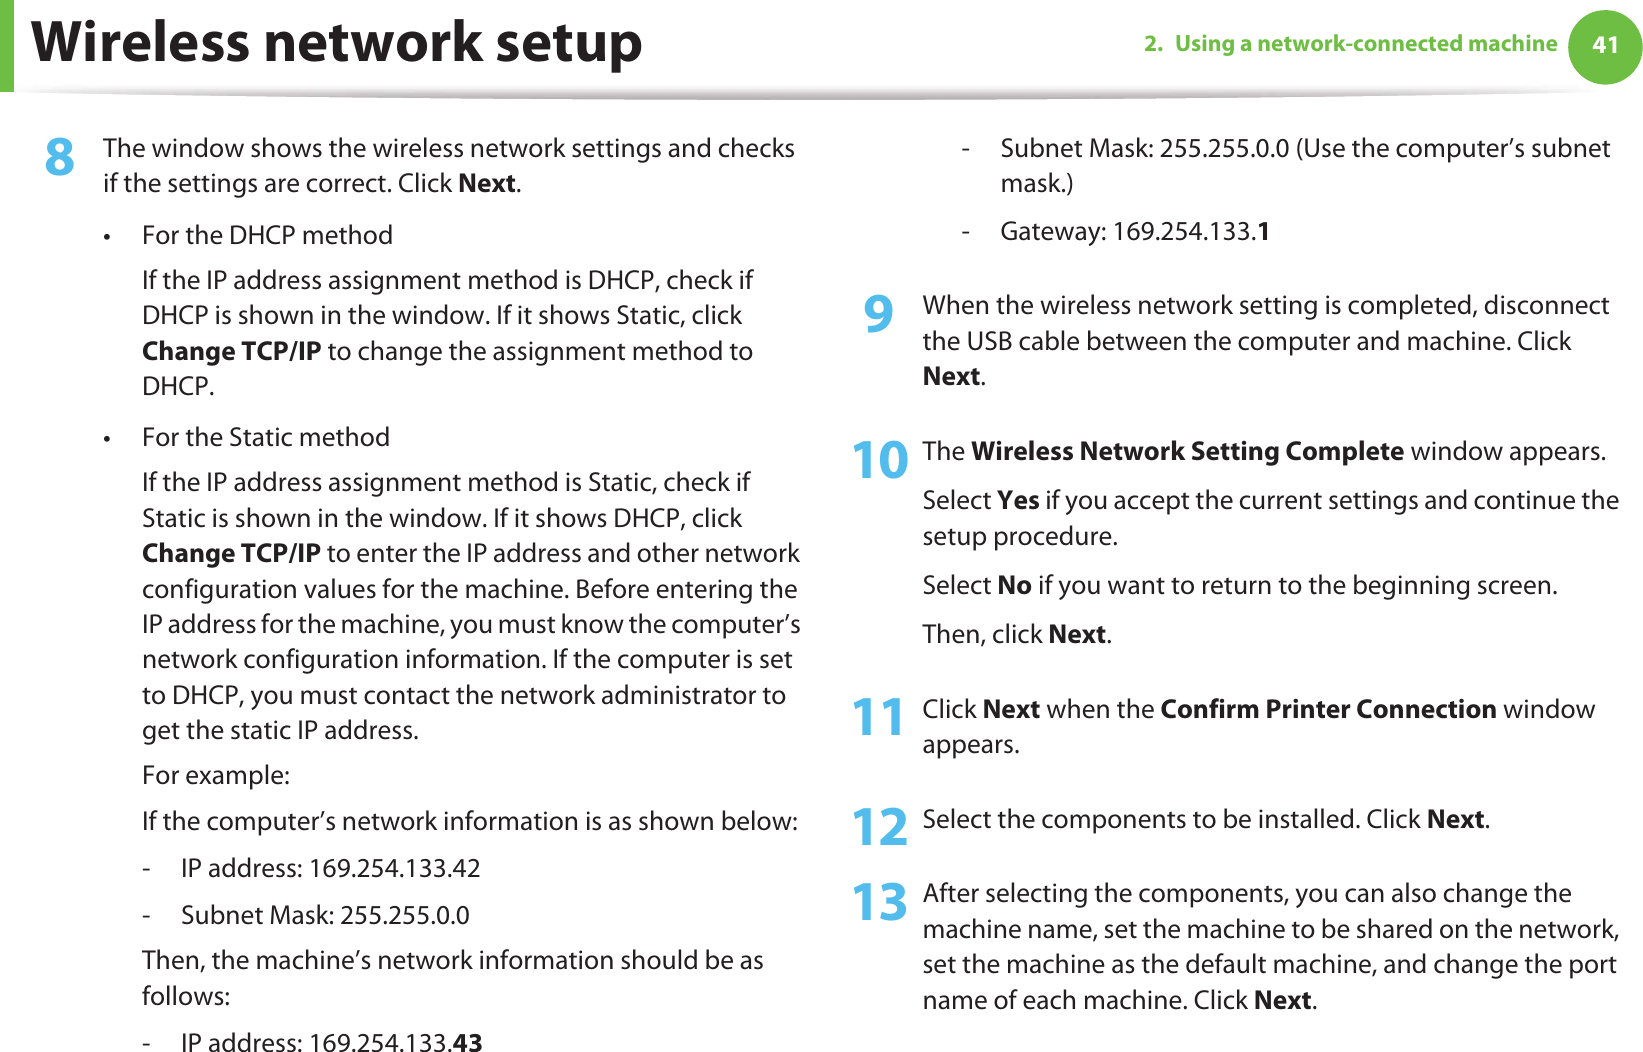 Wireless network setup 412. Using a network-connected machine8  The window shows the wireless network settings and checks if the settings are correct. Click Next.• For the DHCP methodIf the IP address assignment method is DHCP, check if DHCP is shown in the window. If it shows Static, click Change TCP/IP to change the assignment method to DHCP.• For the Static methodIf the IP address assignment method is Static, check if Static is shown in the window. If it shows DHCP, click Change TCP/IP to enter the IP address and other network configuration values for the machine. Before entering the IP address for the machine, you must know the computer’s network configuration information. If the computer is set to DHCP, you must contact the network administrator to get the static IP address.For example:If the computer’s network information is as shown below:- IP address: 169.254.133.42- Subnet Mask: 255.255.0.0Then, the machine’s network information should be as follows:- IP address: 169.254.133.43 - Subnet Mask: 255.255.0.0 (Use the computer’s subnet mask.)- Gateway: 169.254.133.19  When the wireless network setting is completed, disconnect the USB cable between the computer and machine. Click Next.10 The Wireless Network Setting Complete window appears.Select Yes if you accept the current settings and continue the setup procedure.Select No if you want to return to the beginning screen. Then, click Next.11 Click Next when the Confirm Printer Connection window appears.12 Select the components to be installed. Click Next.13 After selecting the components, you can also change the machine name, set the machine to be shared on the network, set the machine as the default machine, and change the port name of each machine. Click Next.